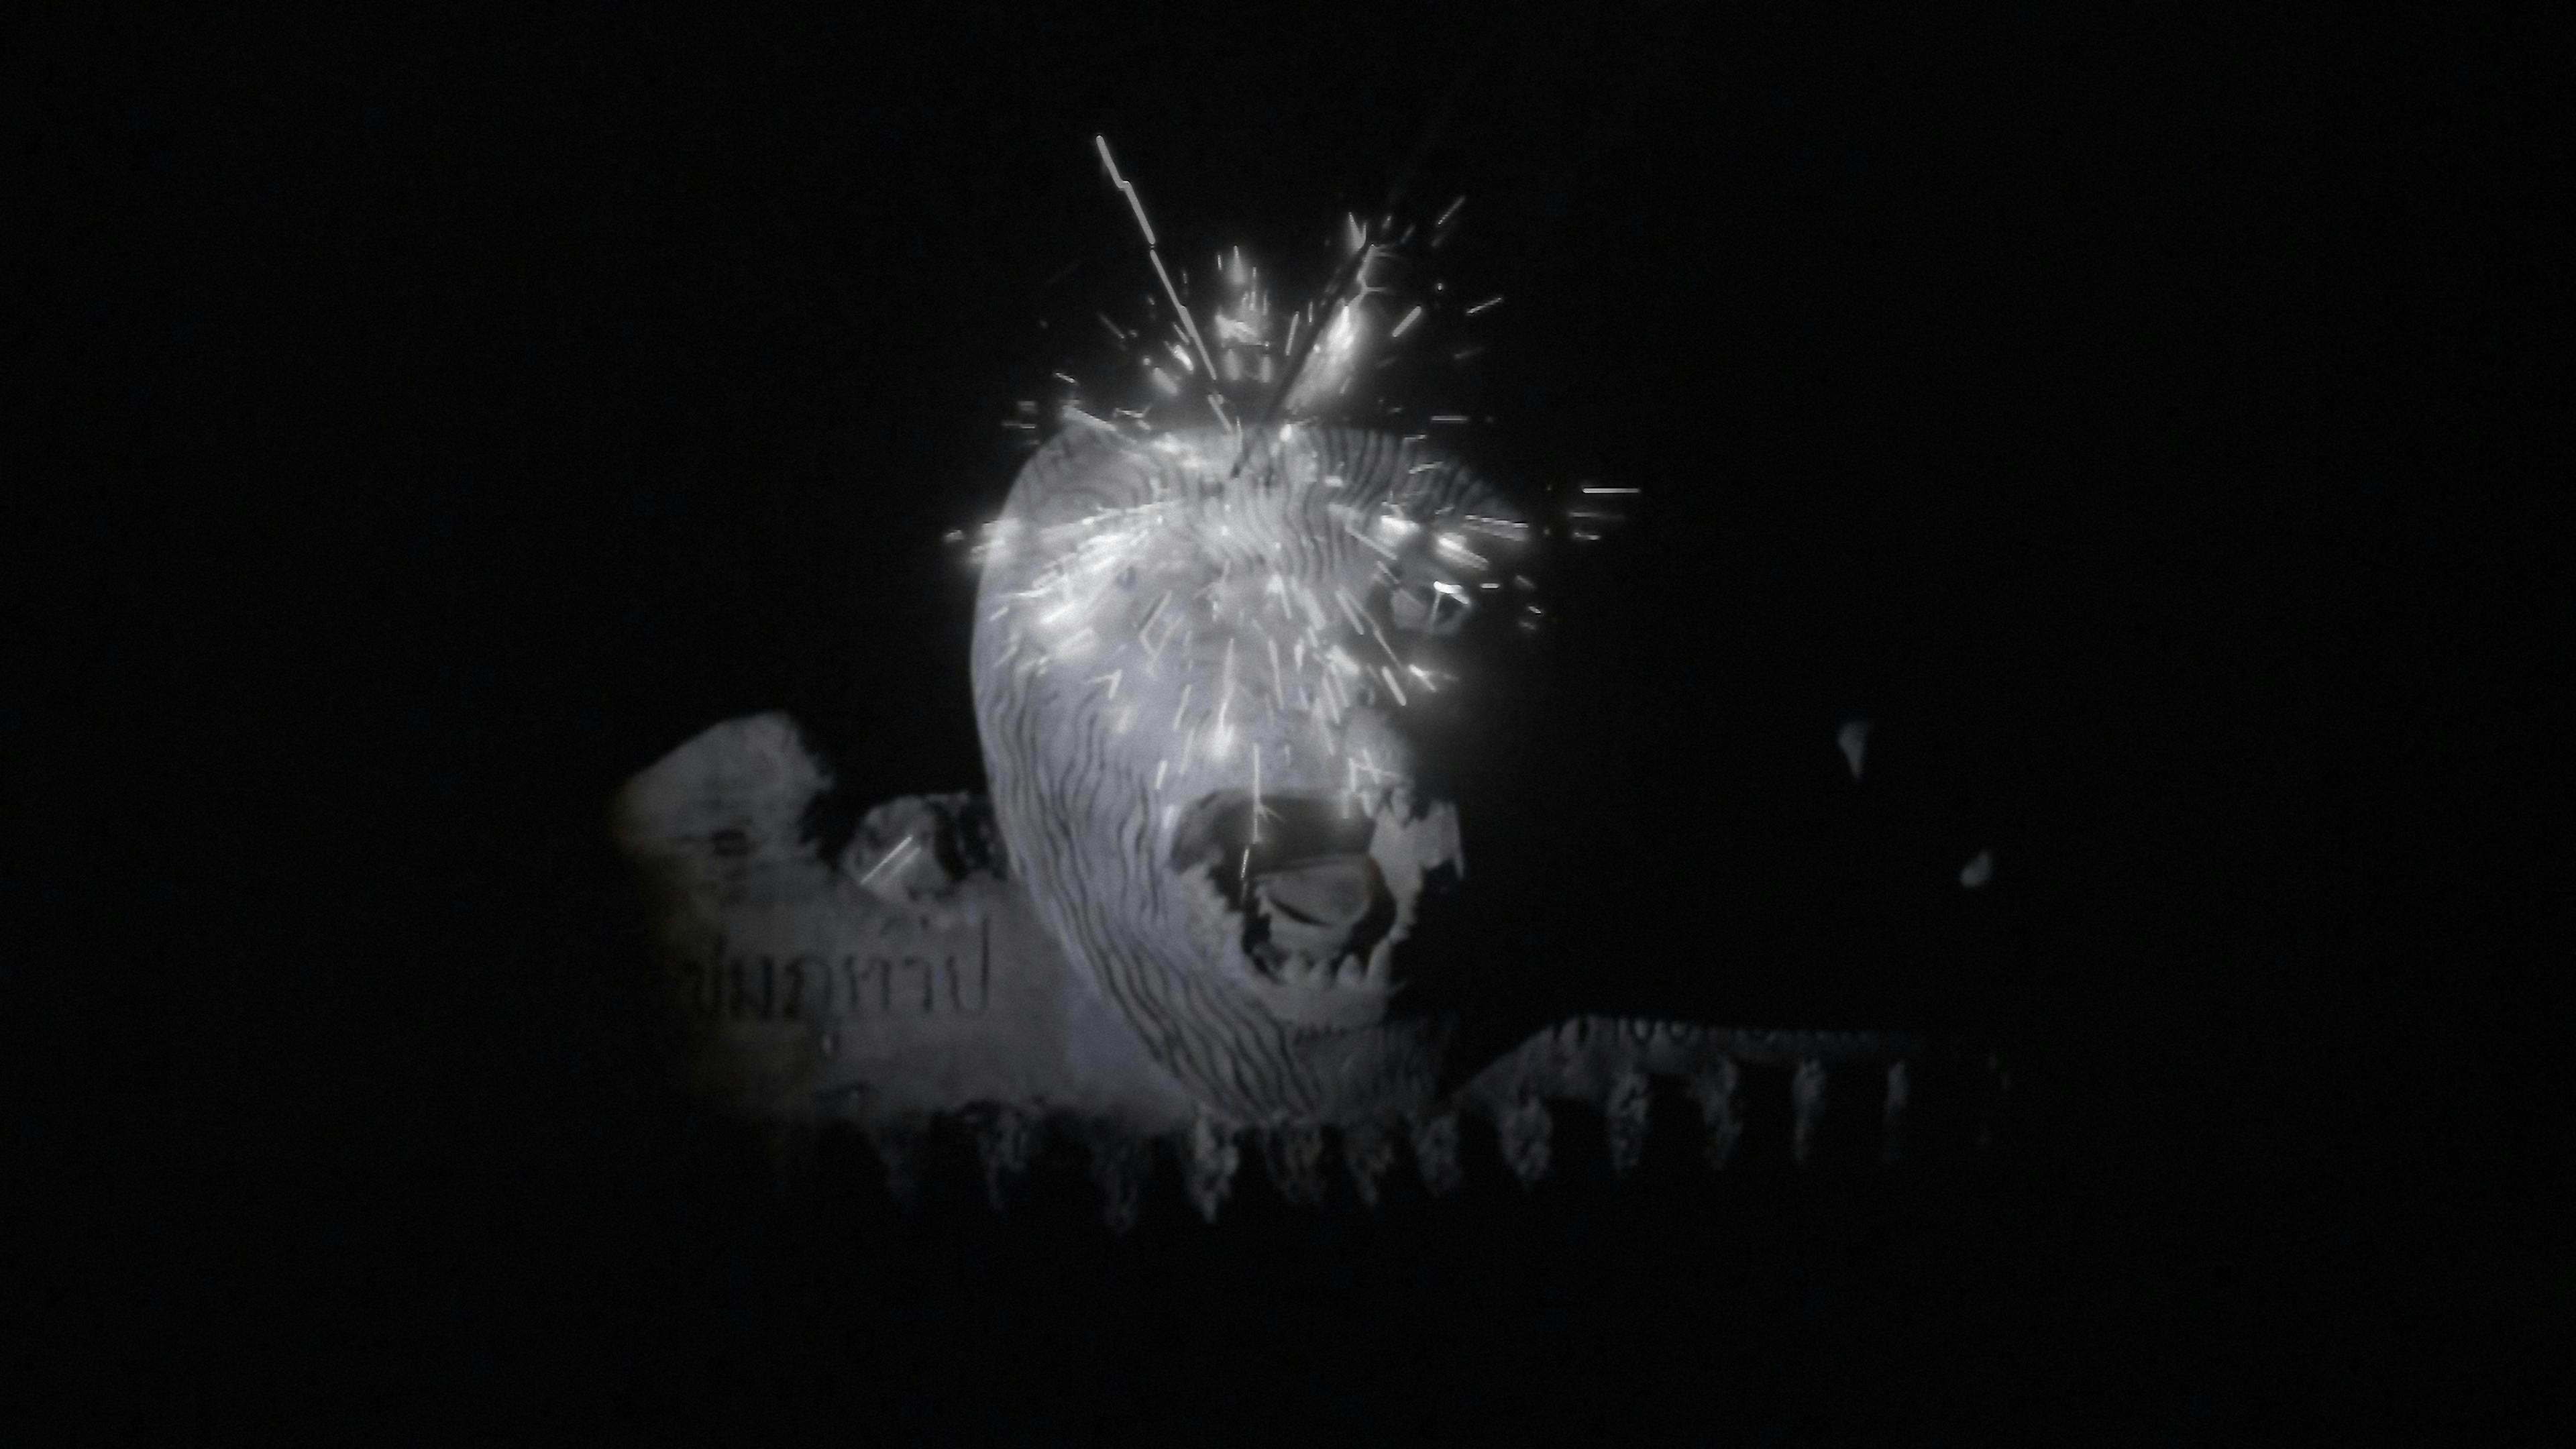 A black and white image of what appears to be a sea creature floating in black space. It has what appear to be fireworks of light radiating from its forehead